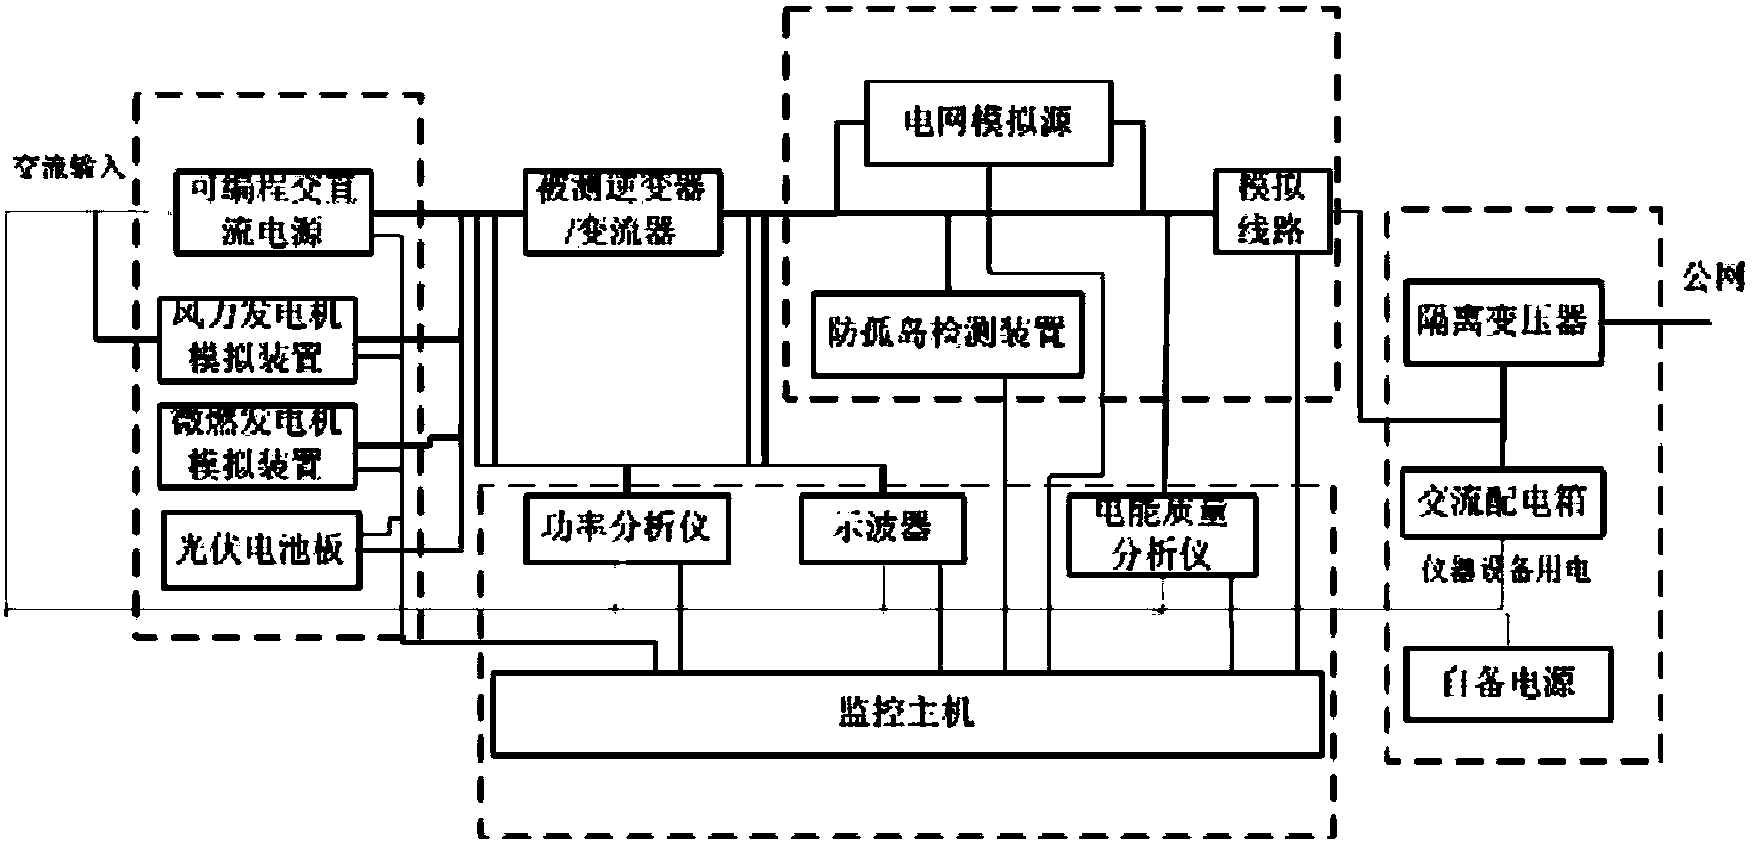 Testing platform and method generally used for whole process of low voltage user side distributed power source grid connection